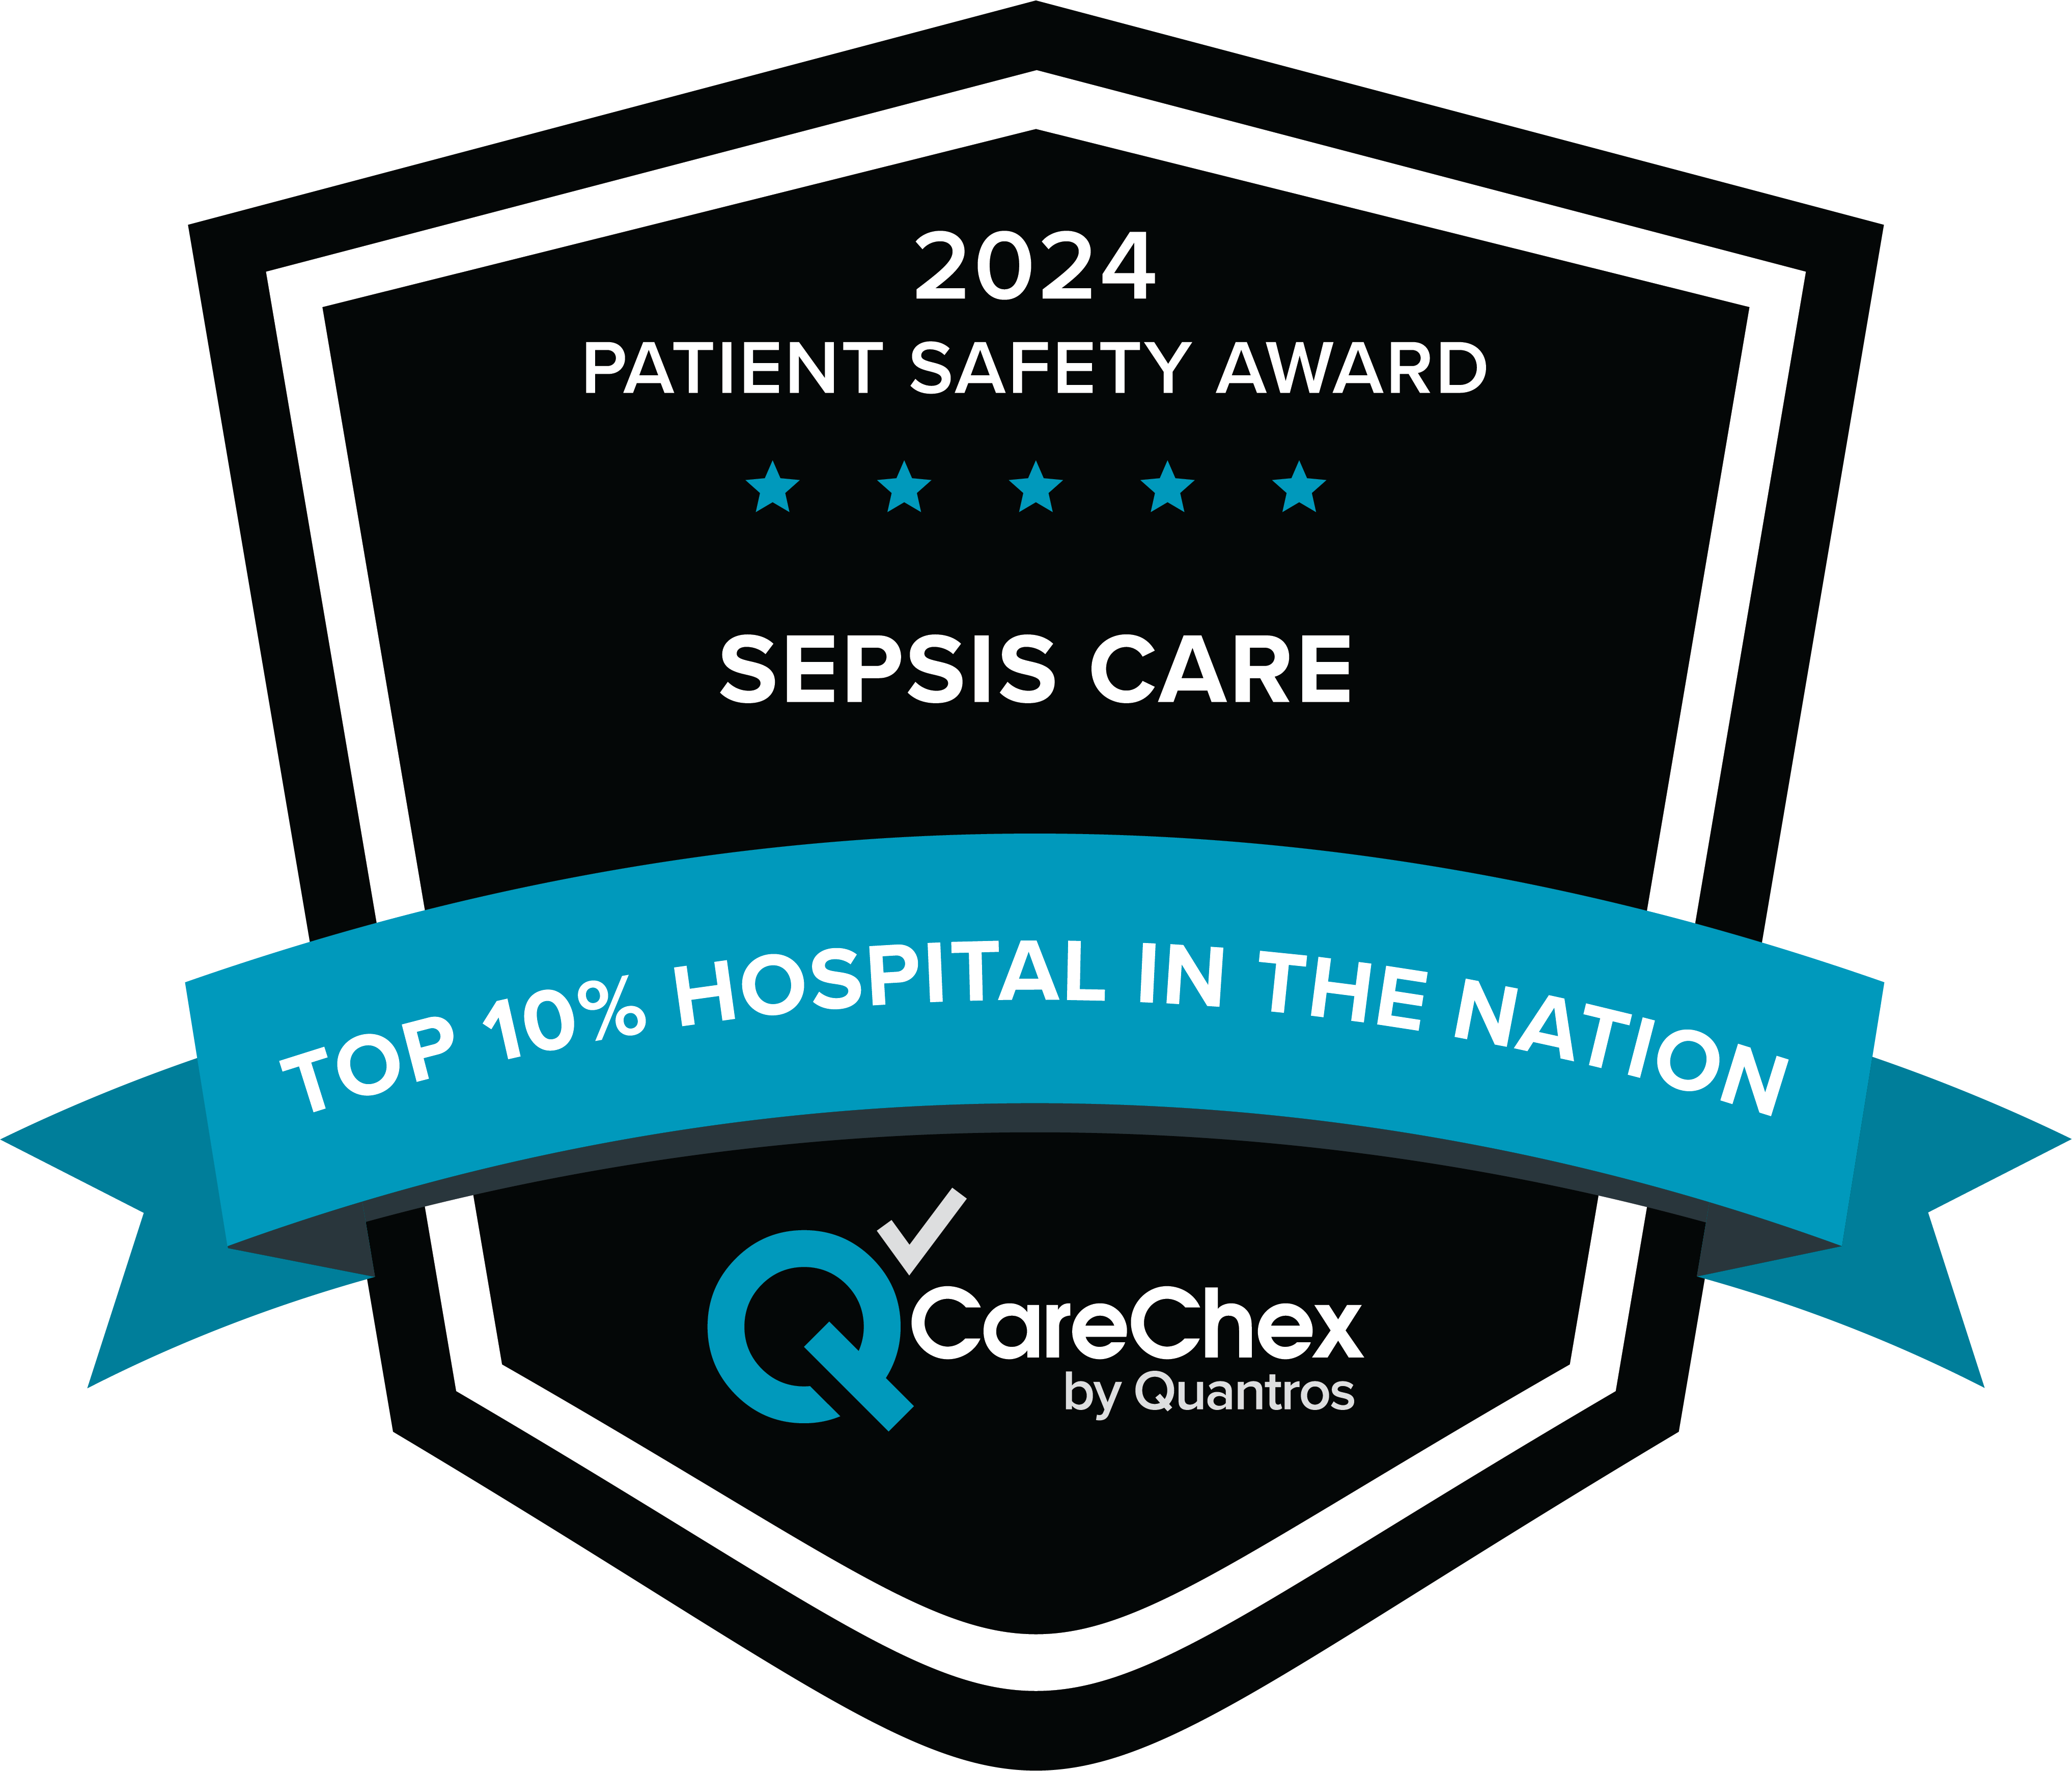 Awards badge for Top 10% Hospital in the Nation for Patient Safety in Sepsis Care – 2024 CareChex by Quantros